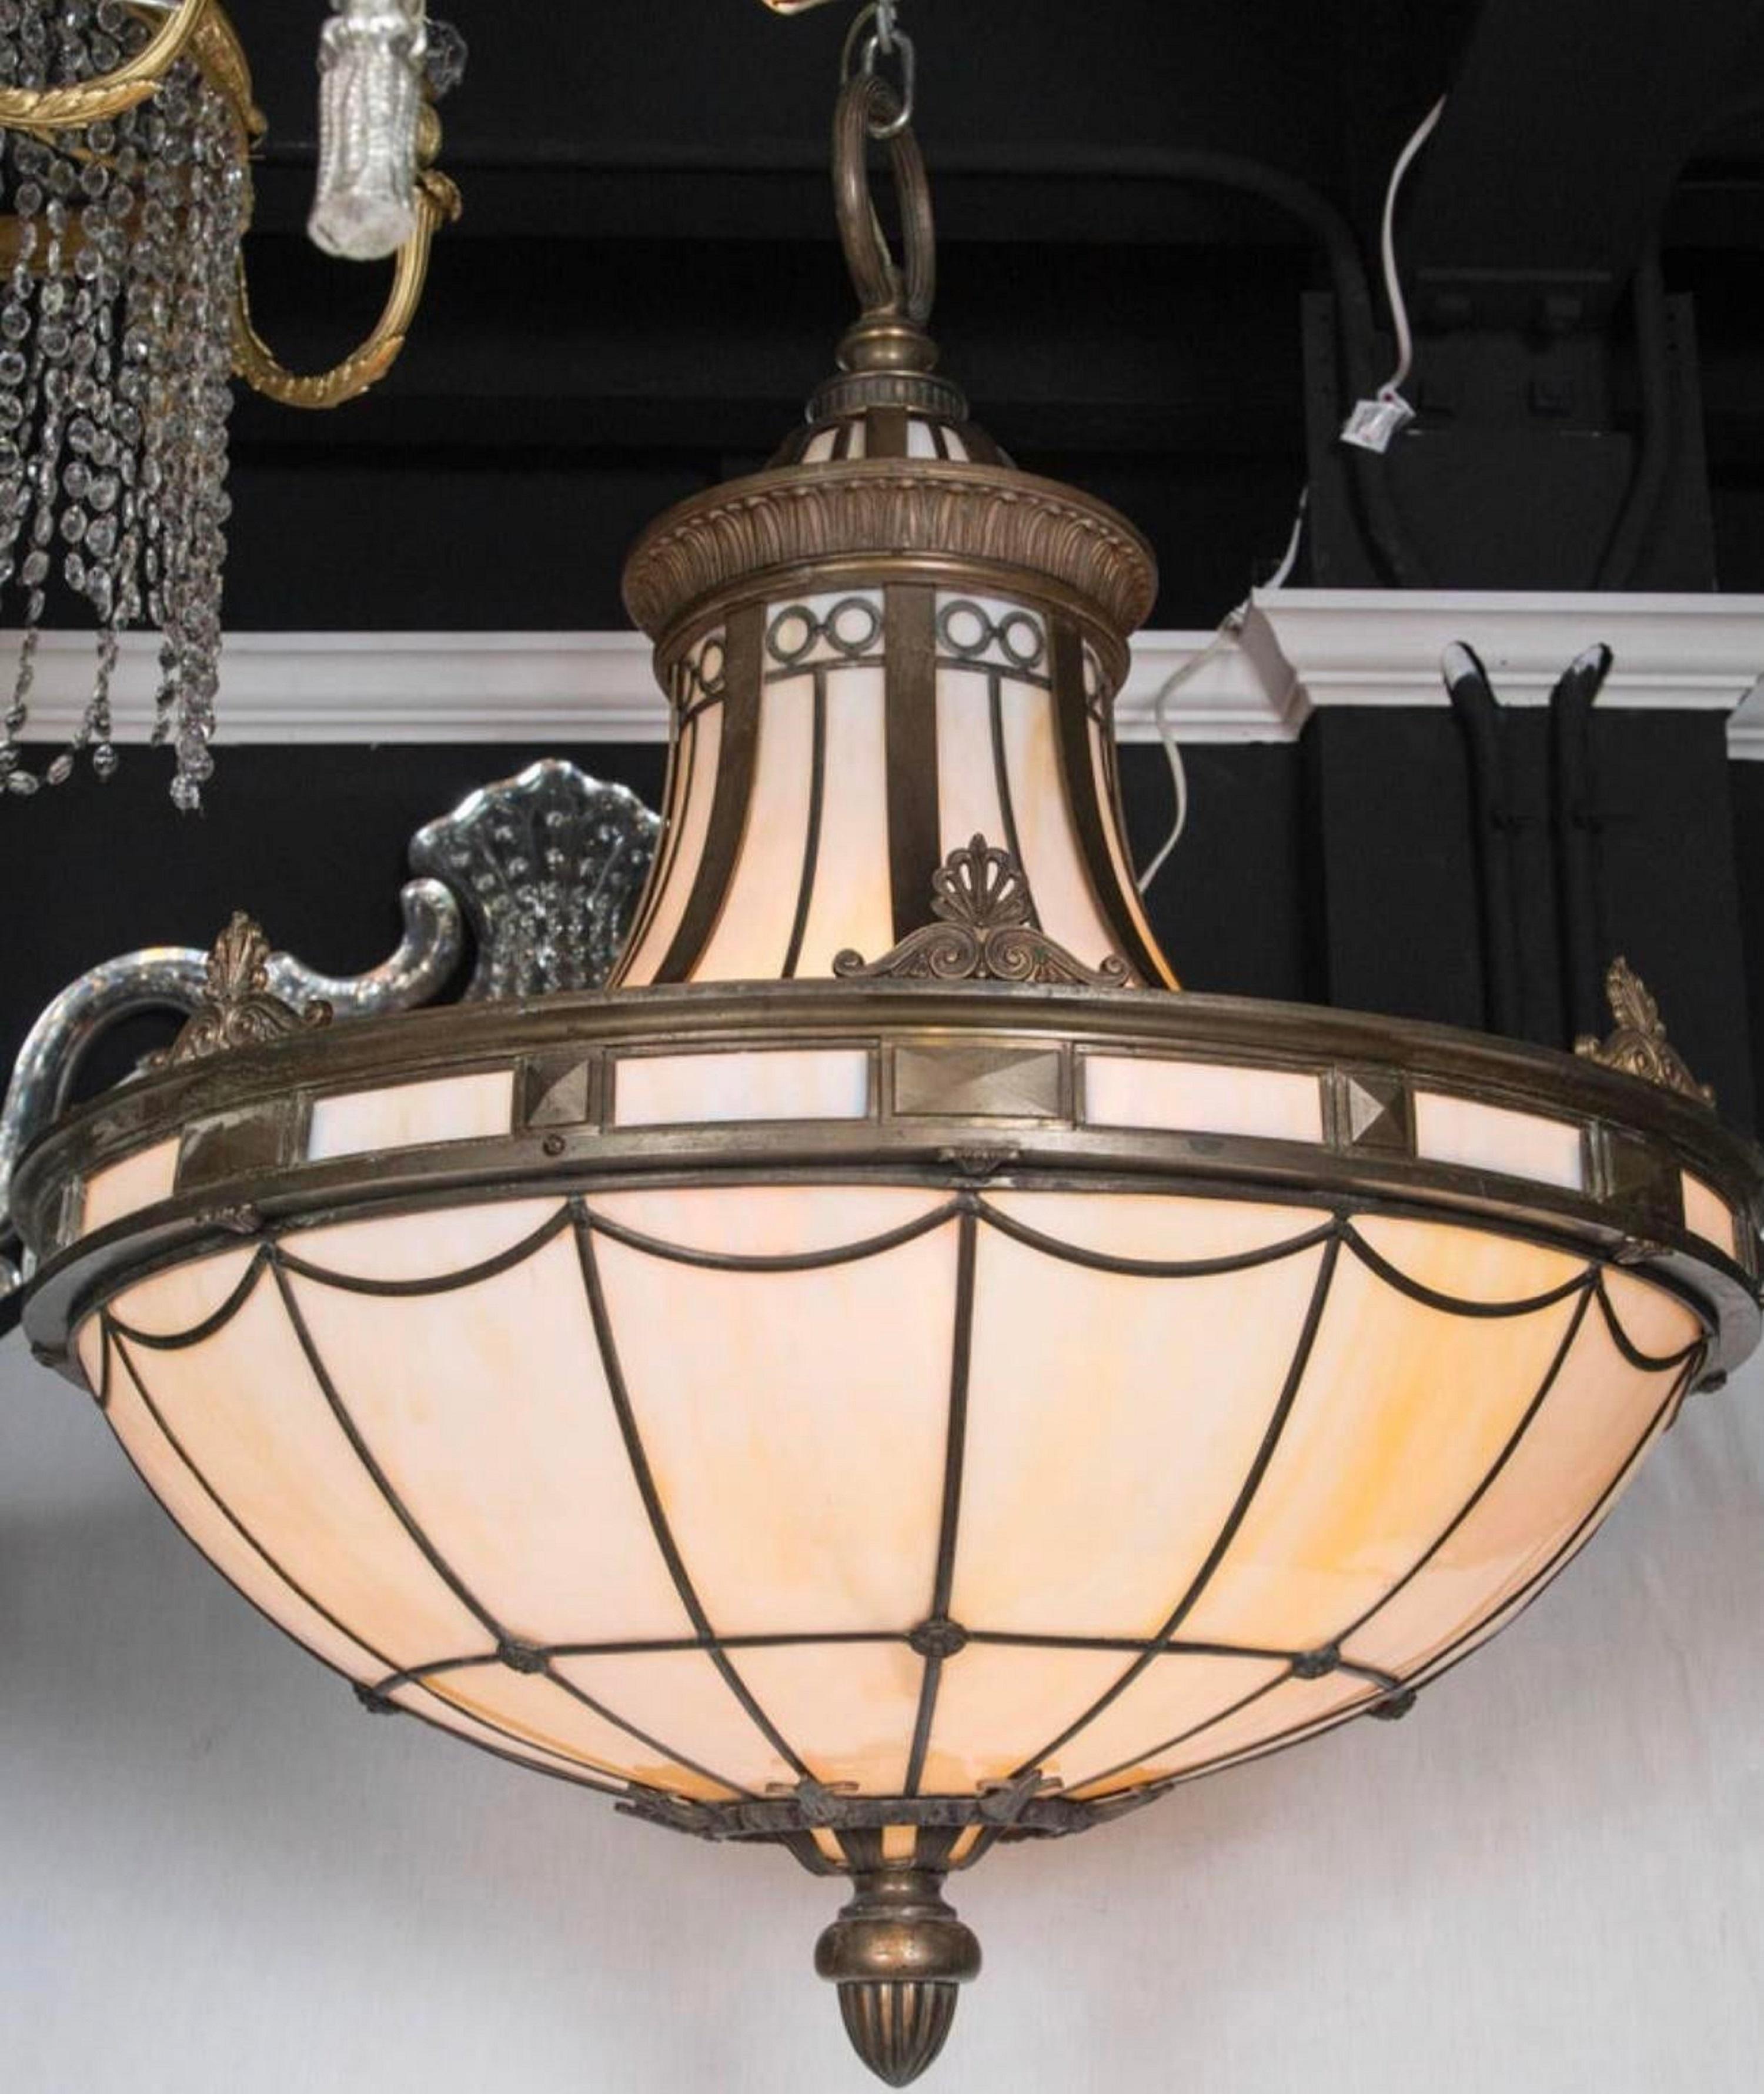 1900s Caldwell Leaded Glass Light Fixture In Good Condition For Sale In New York, NY